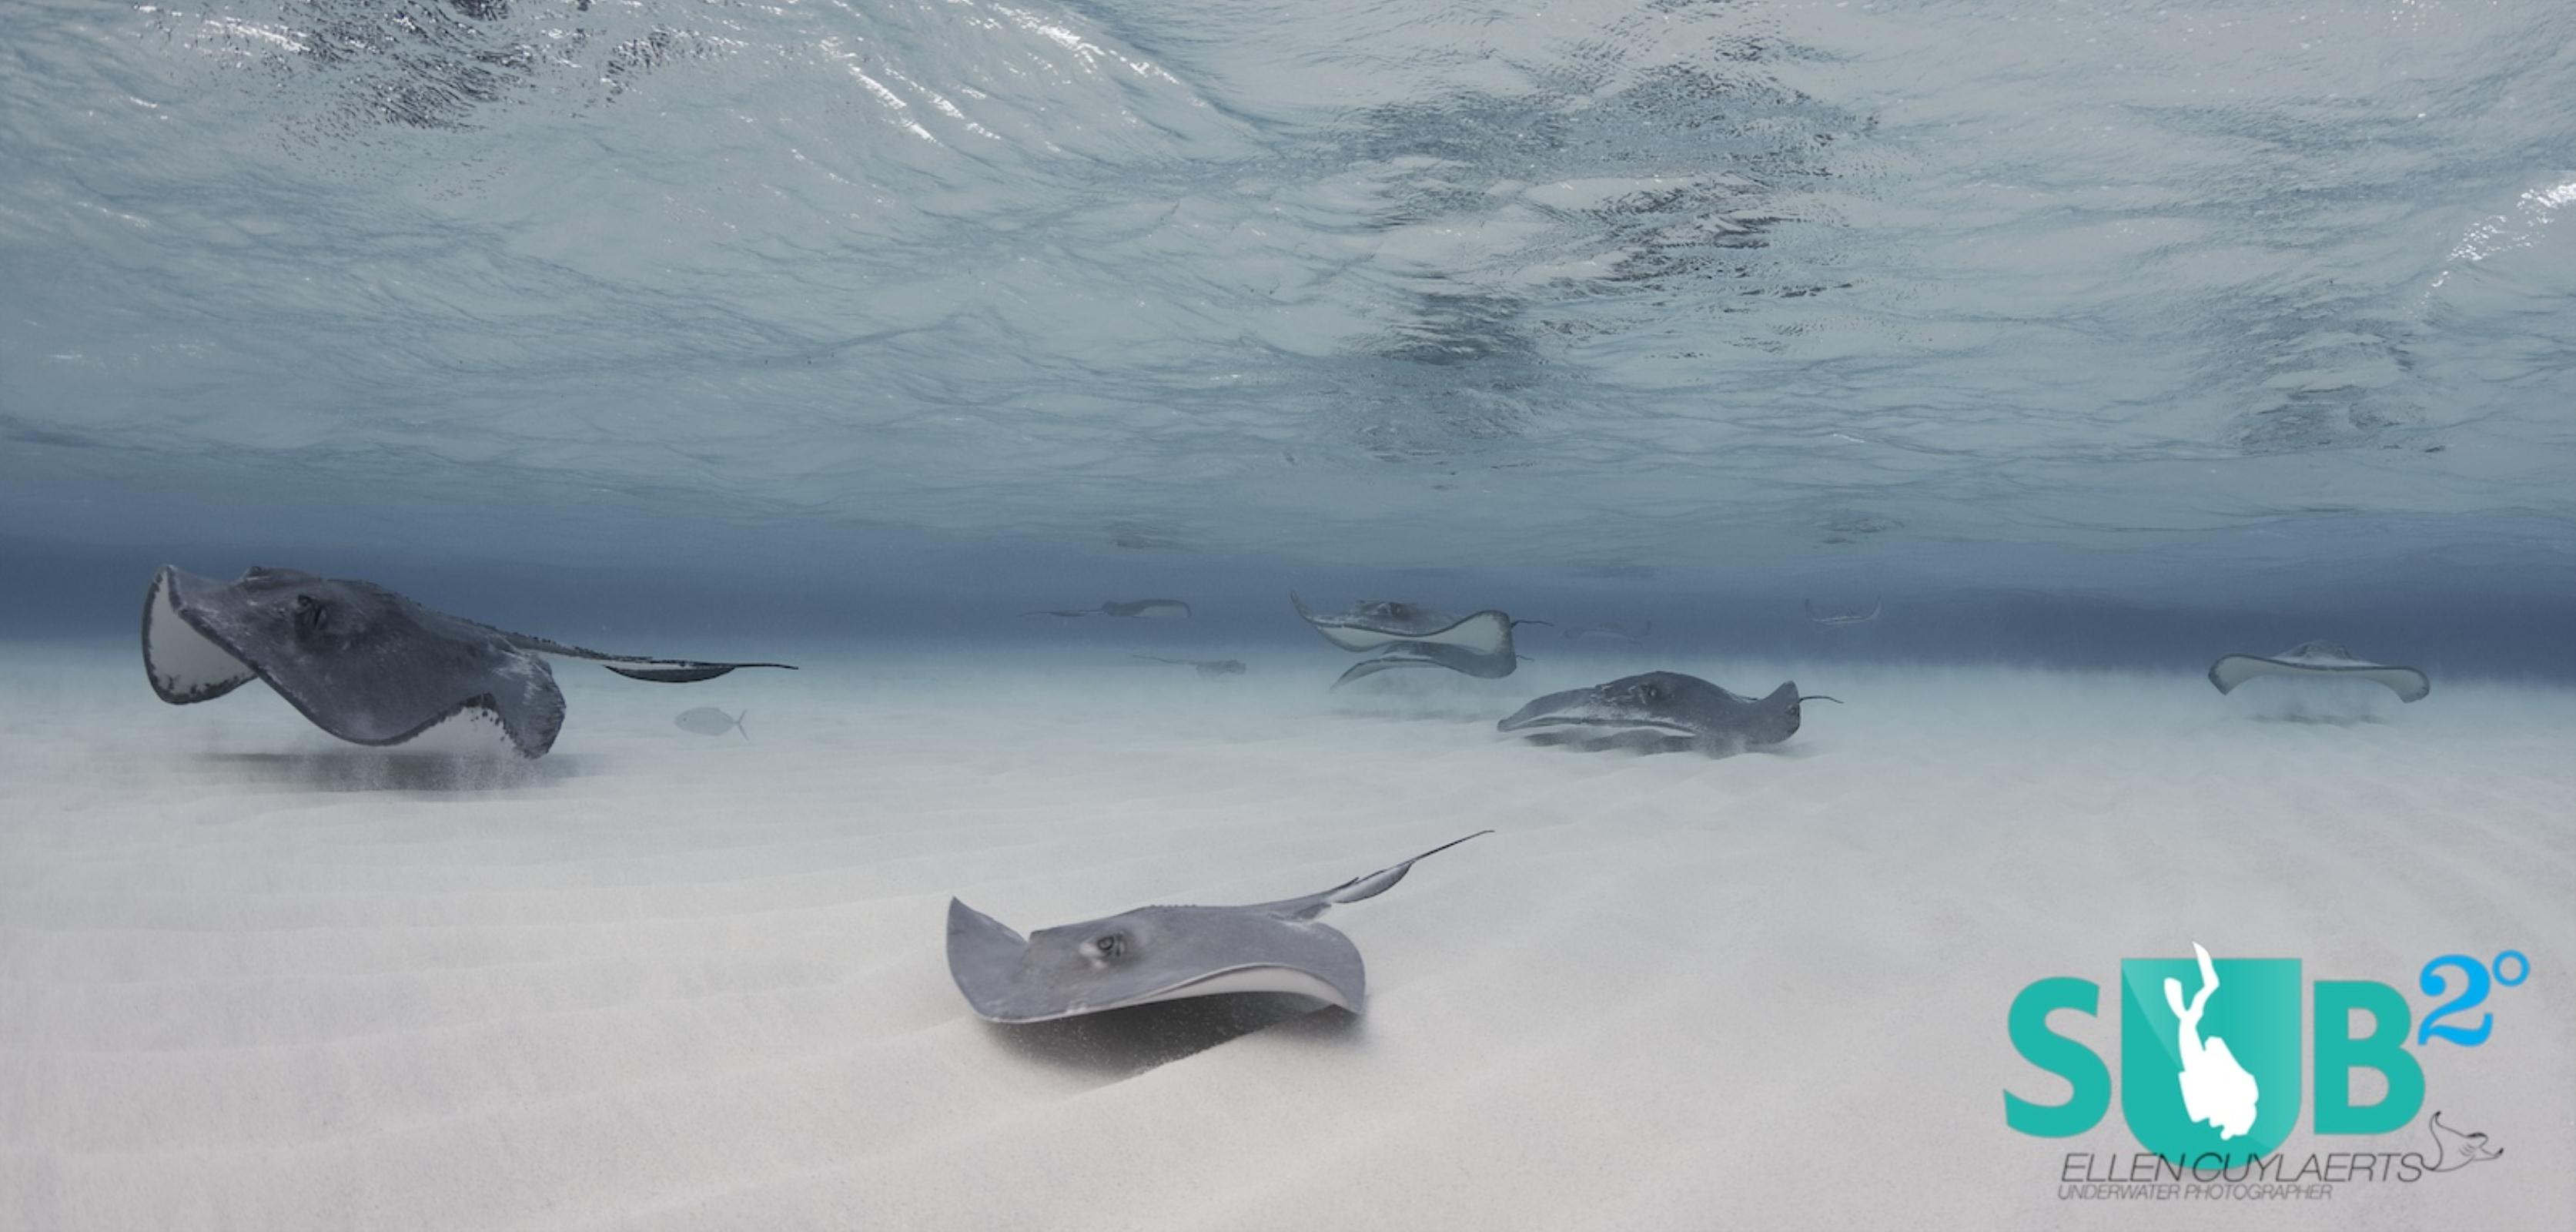 The last years numbers of stingrays declined...